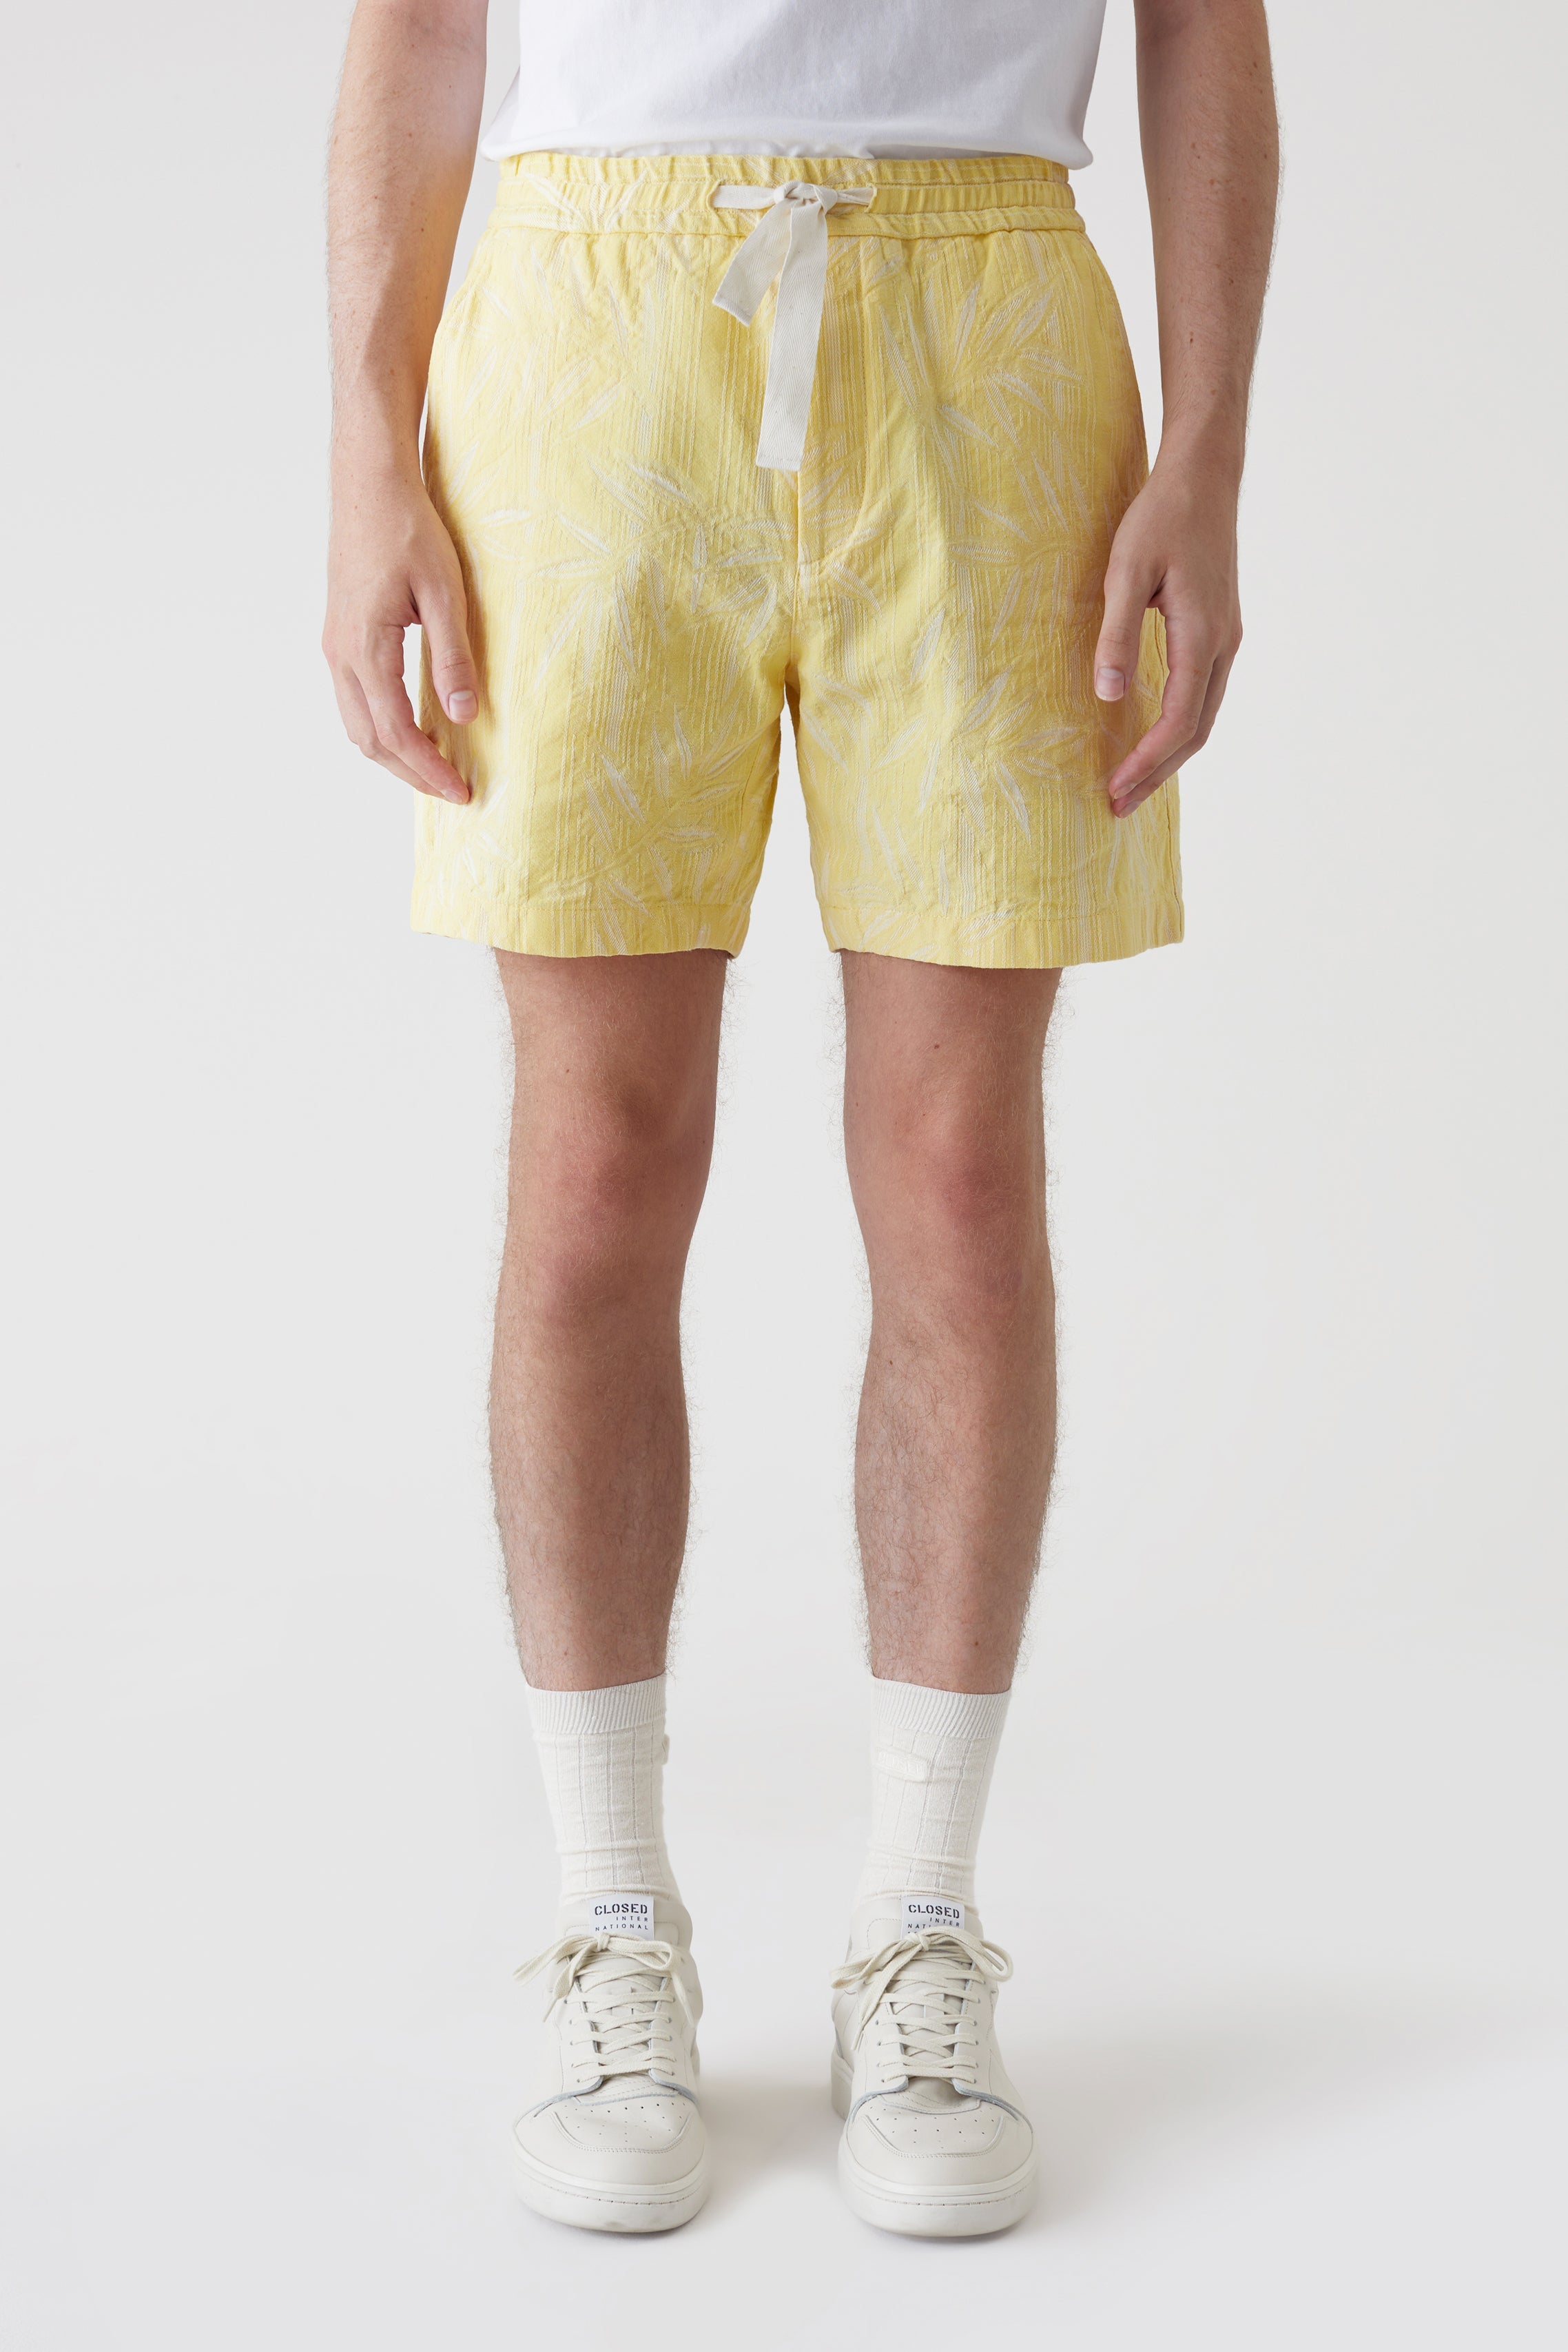 CLOSED-OUTLET-SALE-DRAWSTRING-SHORTS-Hosen-ARCHIVE-COLLECTION_b9993993-14d8-49ab-a5c2-40a73730ef49.jpg